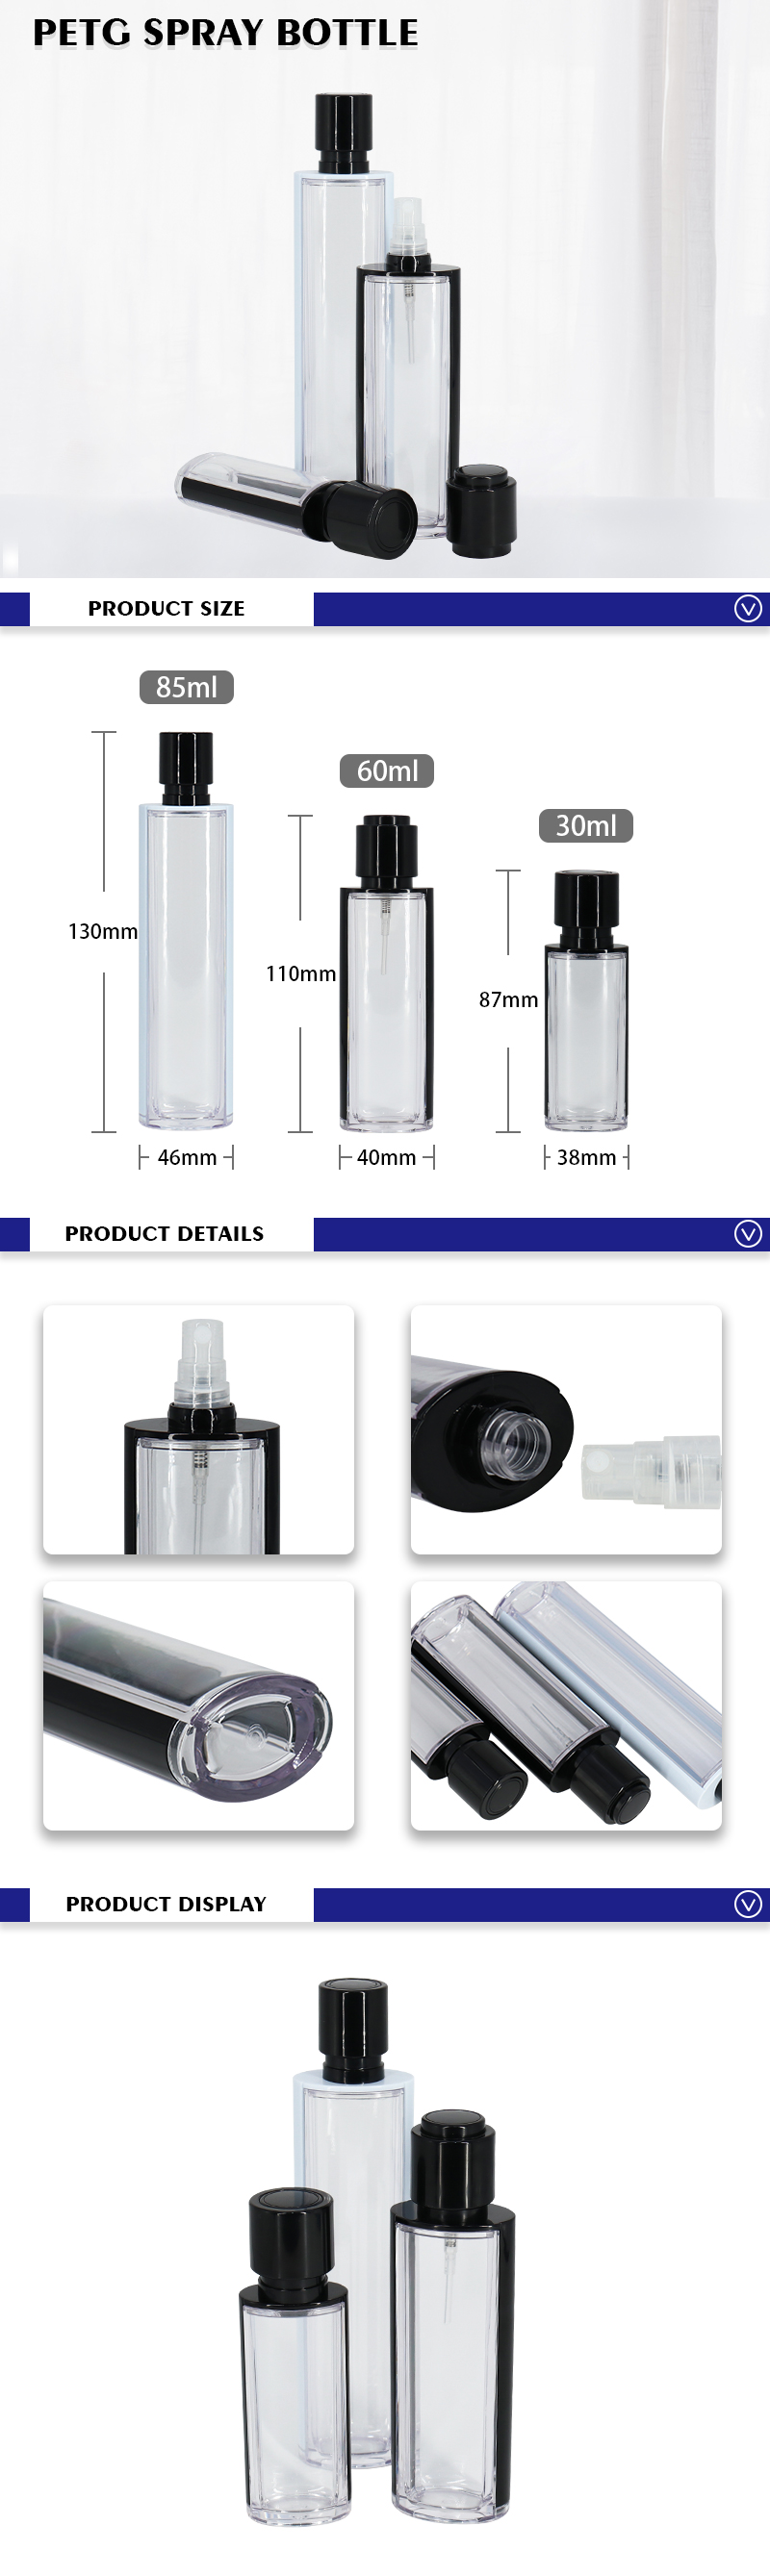 three capacities for PETG lotion or Spray bottle